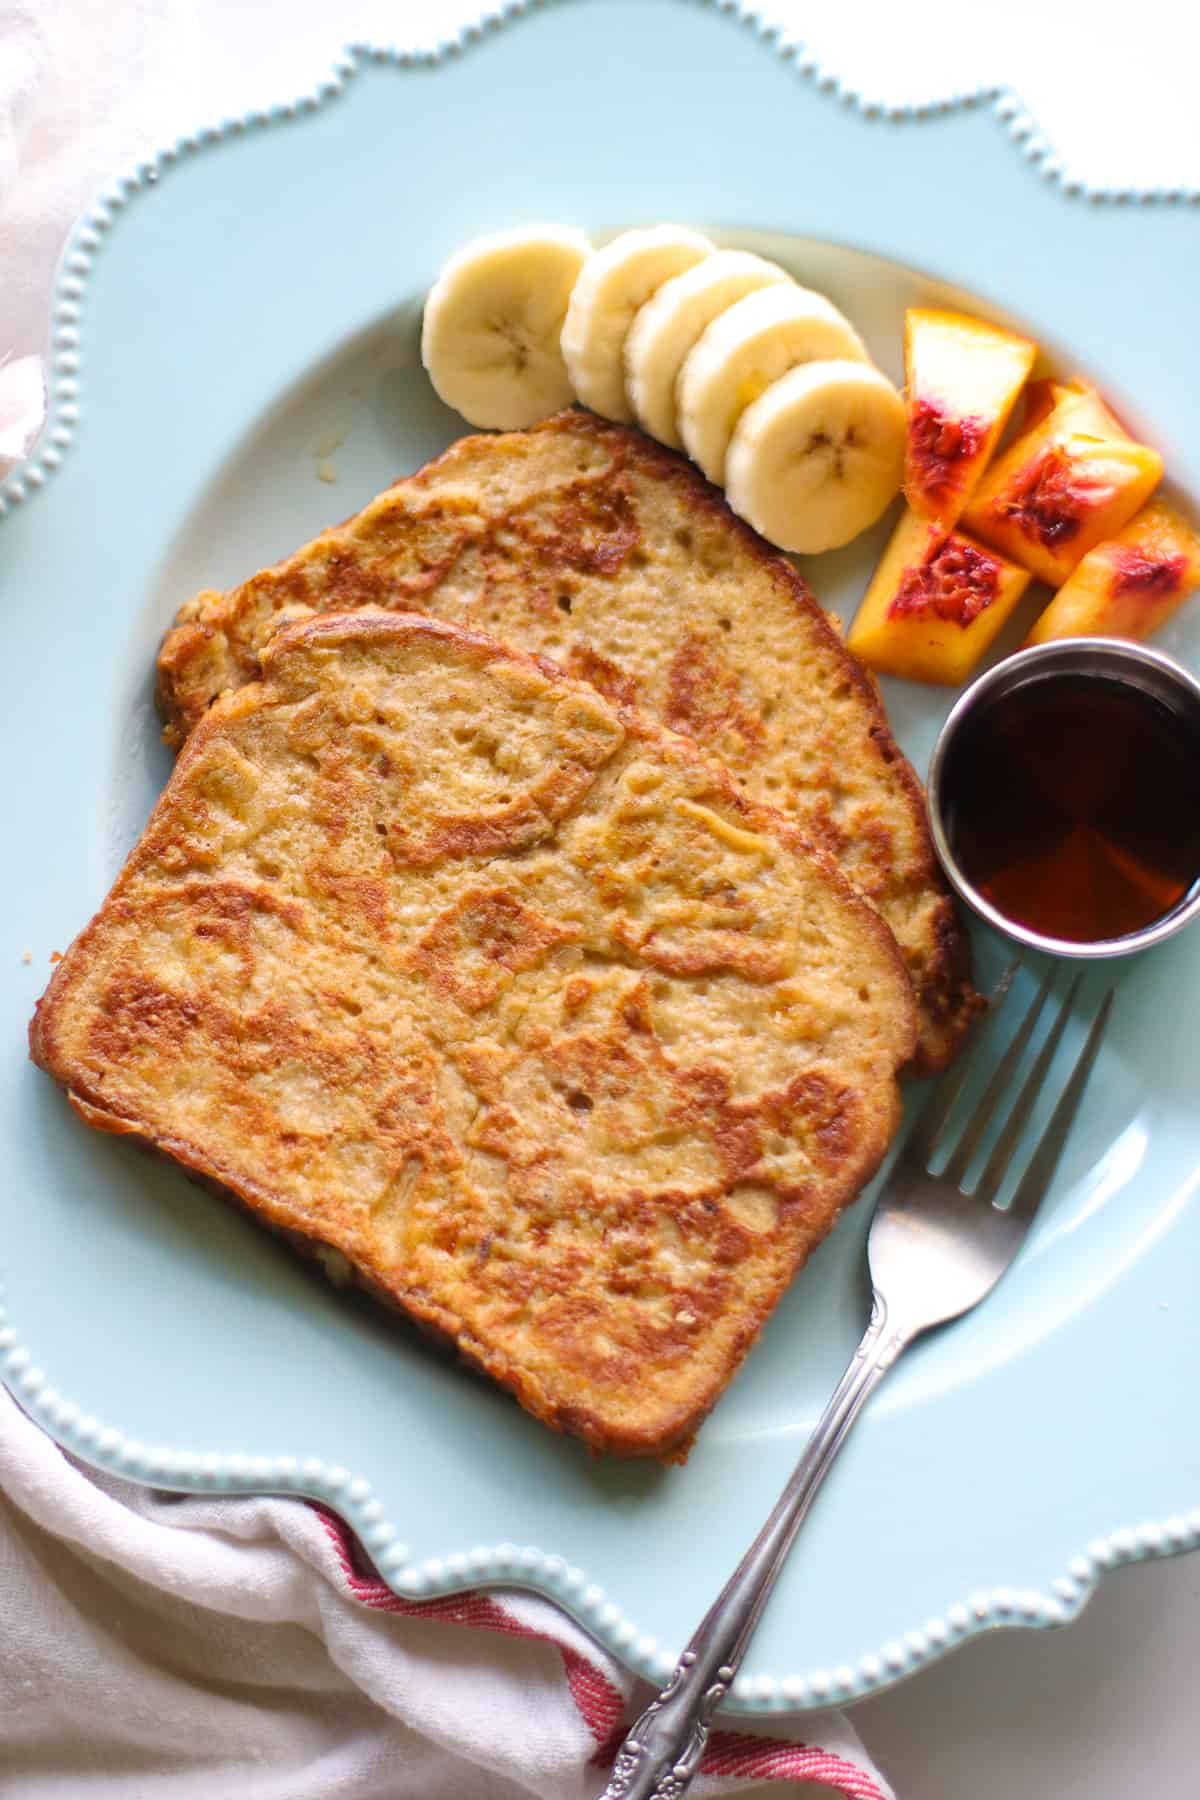 2 slices of French toast with banana, peaches, and syrup.